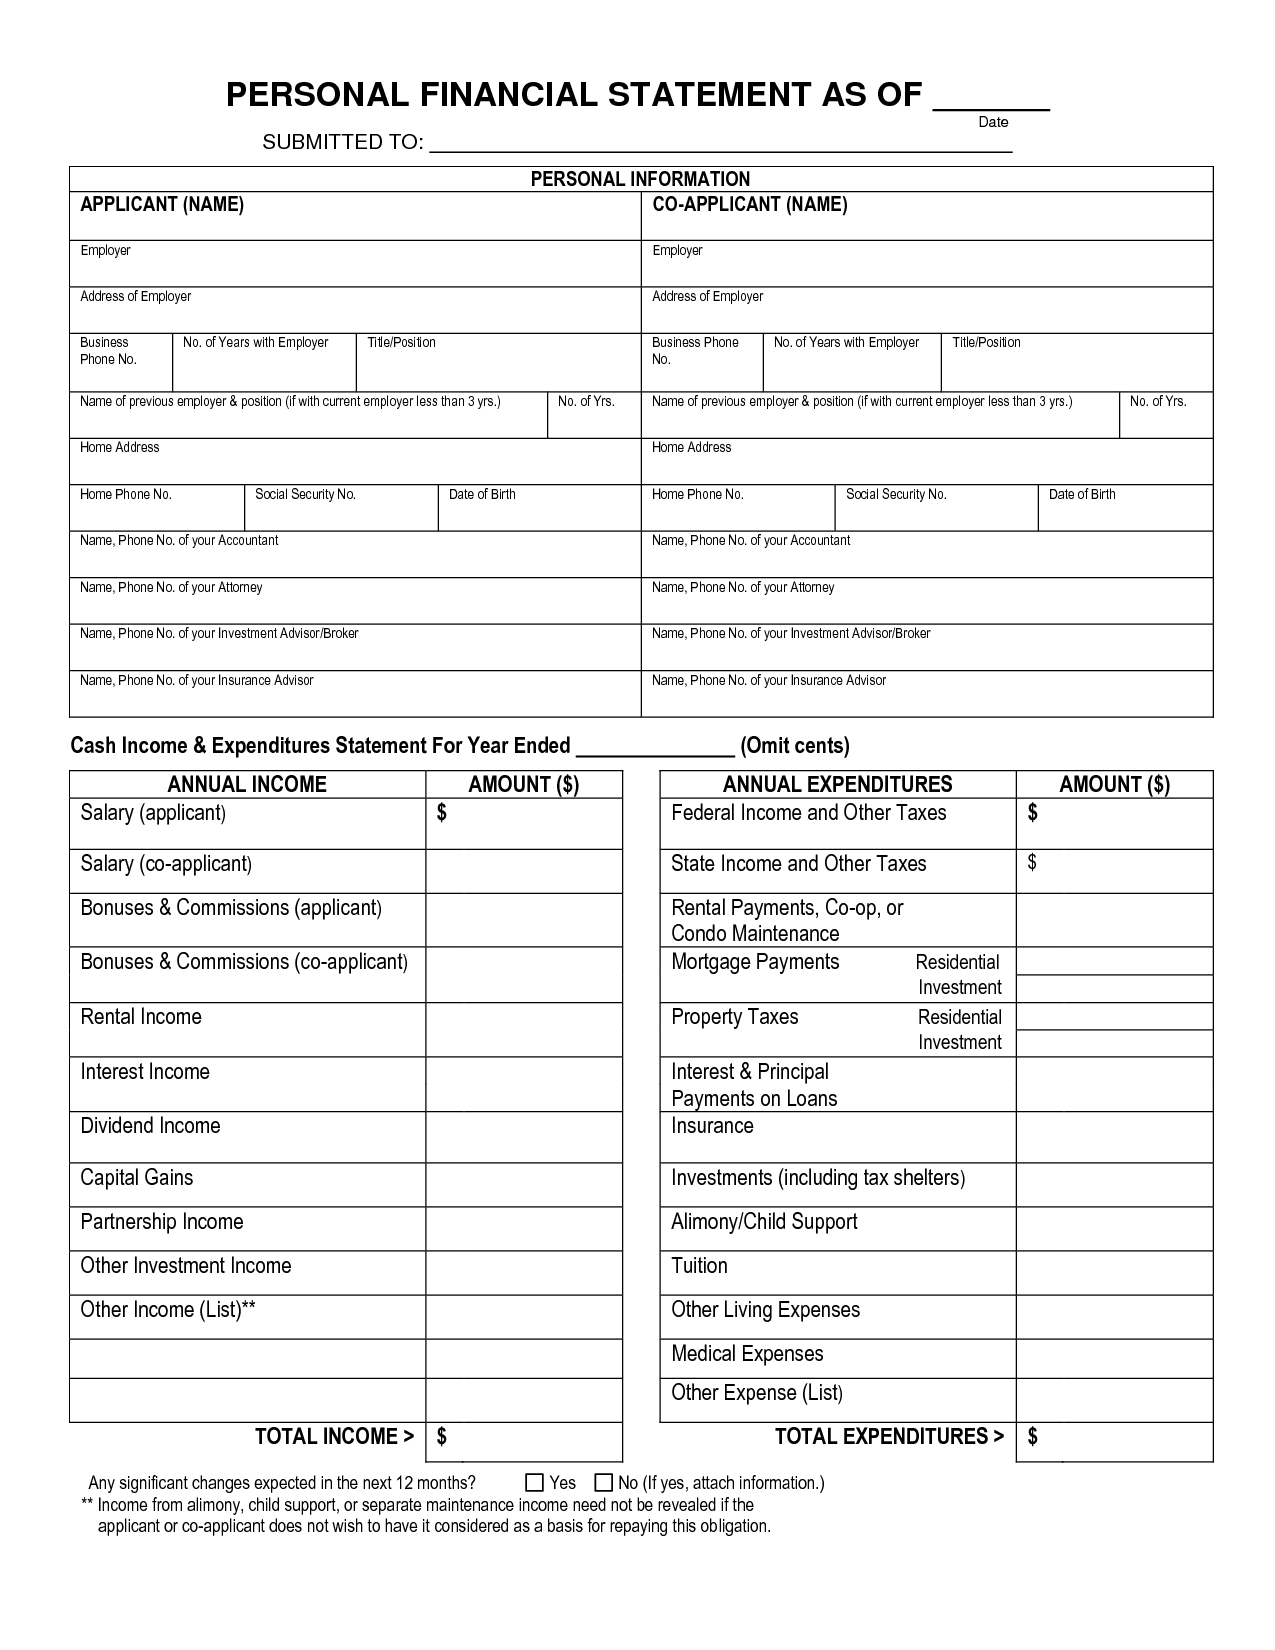 Free Printable Personal Financial Statement | Blank Personal Regarding Blank Personal Financial Statement Template